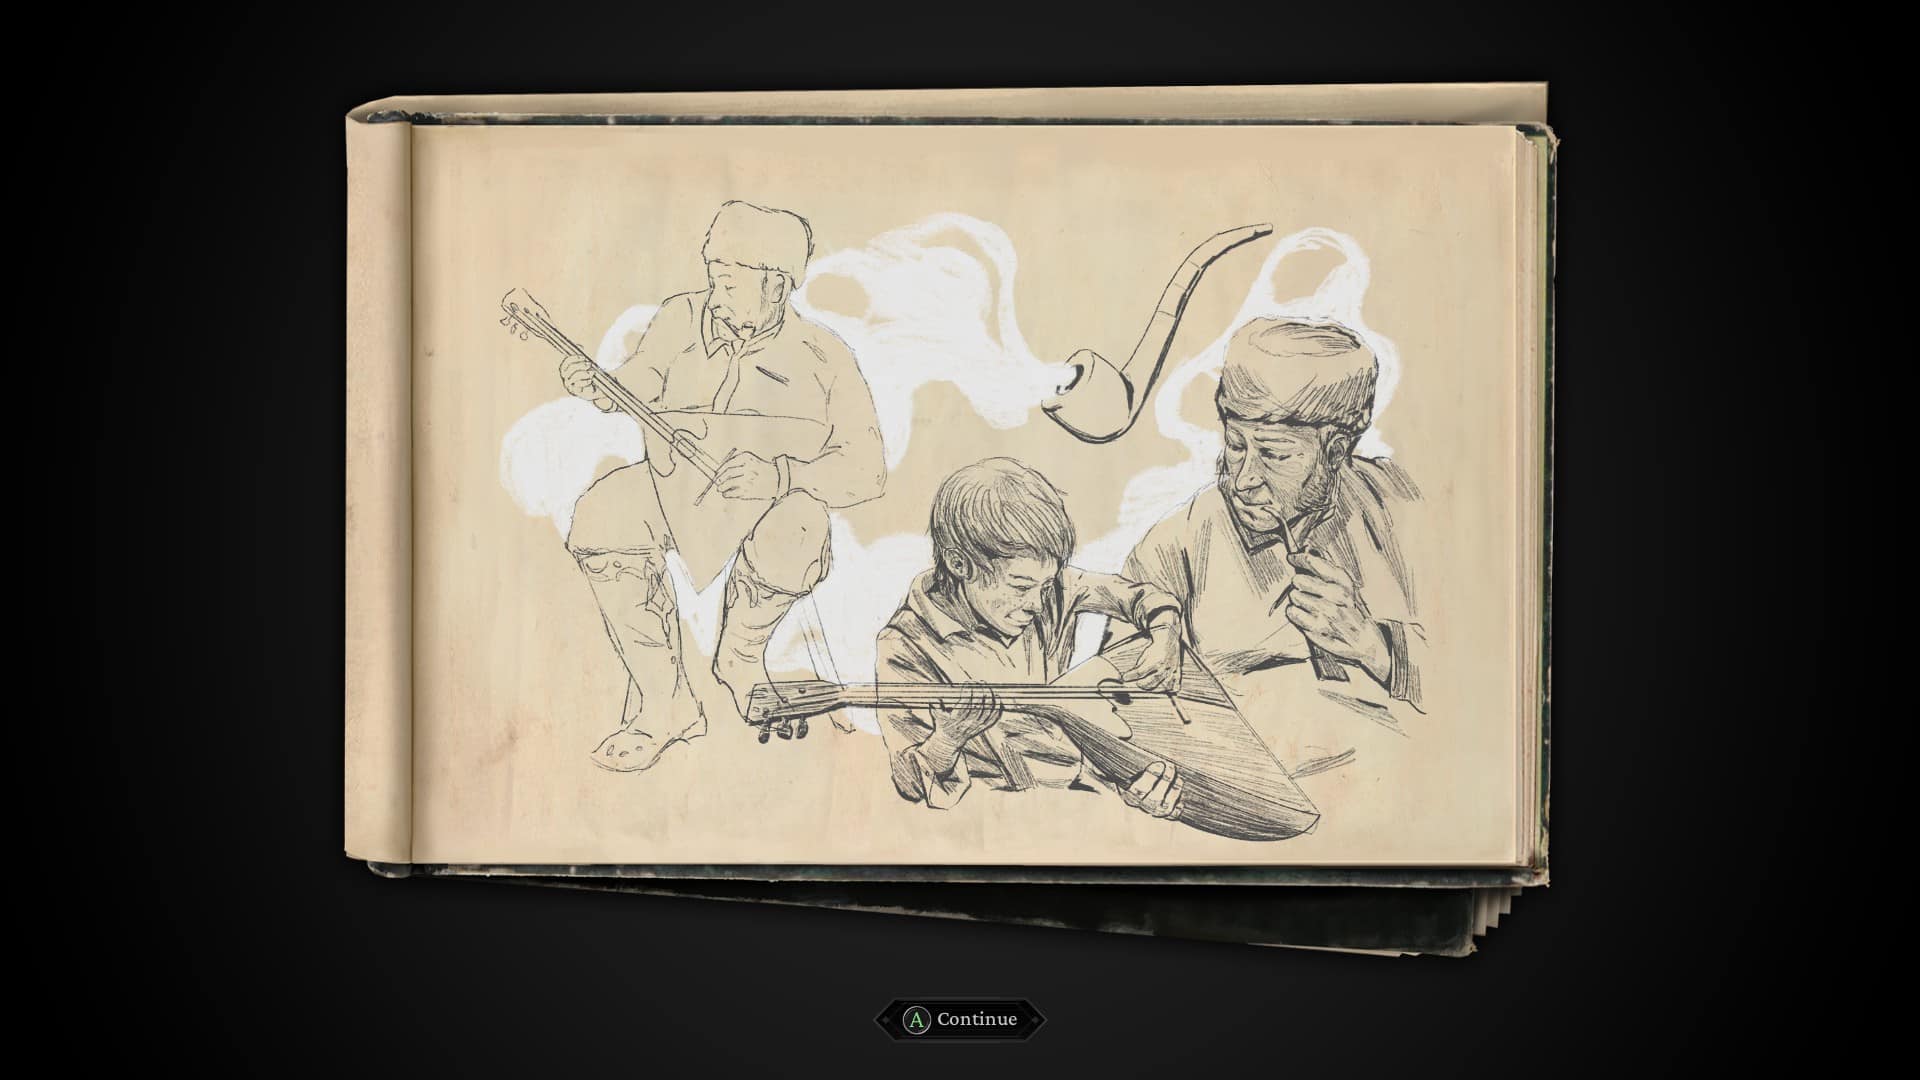 The Thaumaturge review: A drawing of a man and boy playing the balalaika, with a pipe smoking in the background.